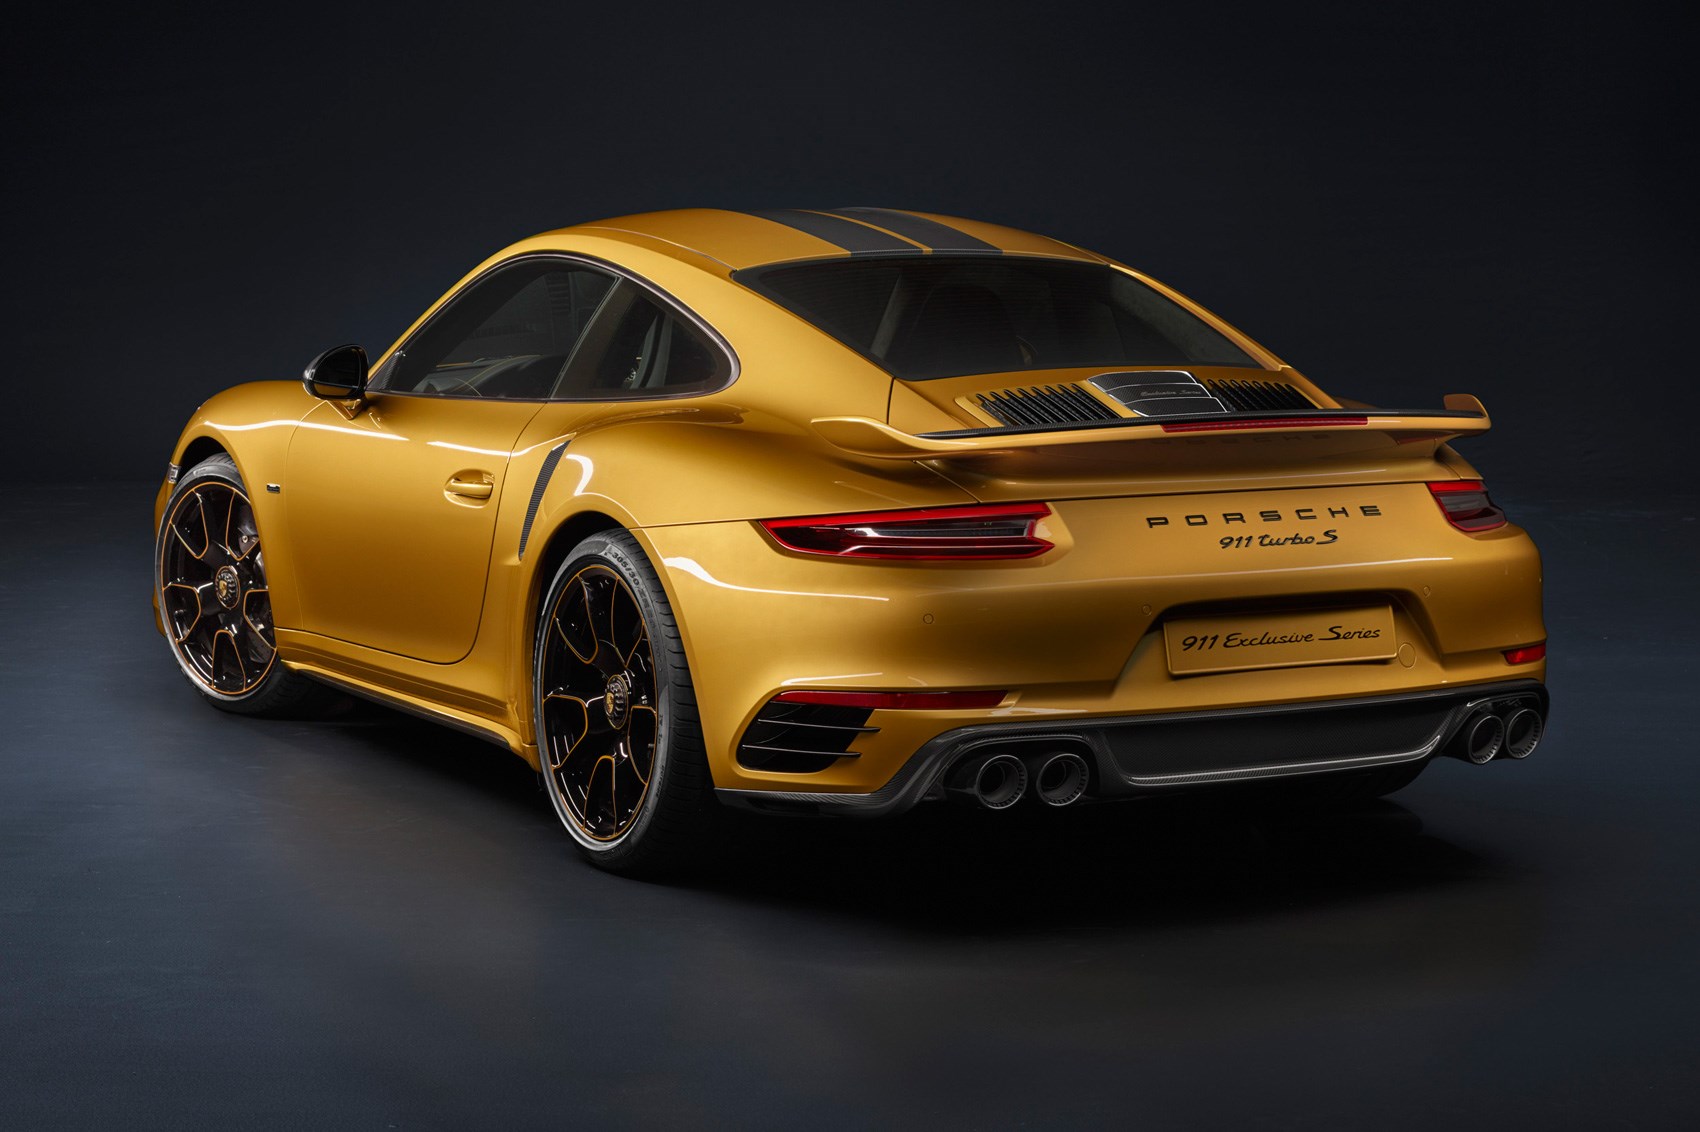 Porsche 911 Turbo S Exclusive Series the most powerful 911 Turbo of